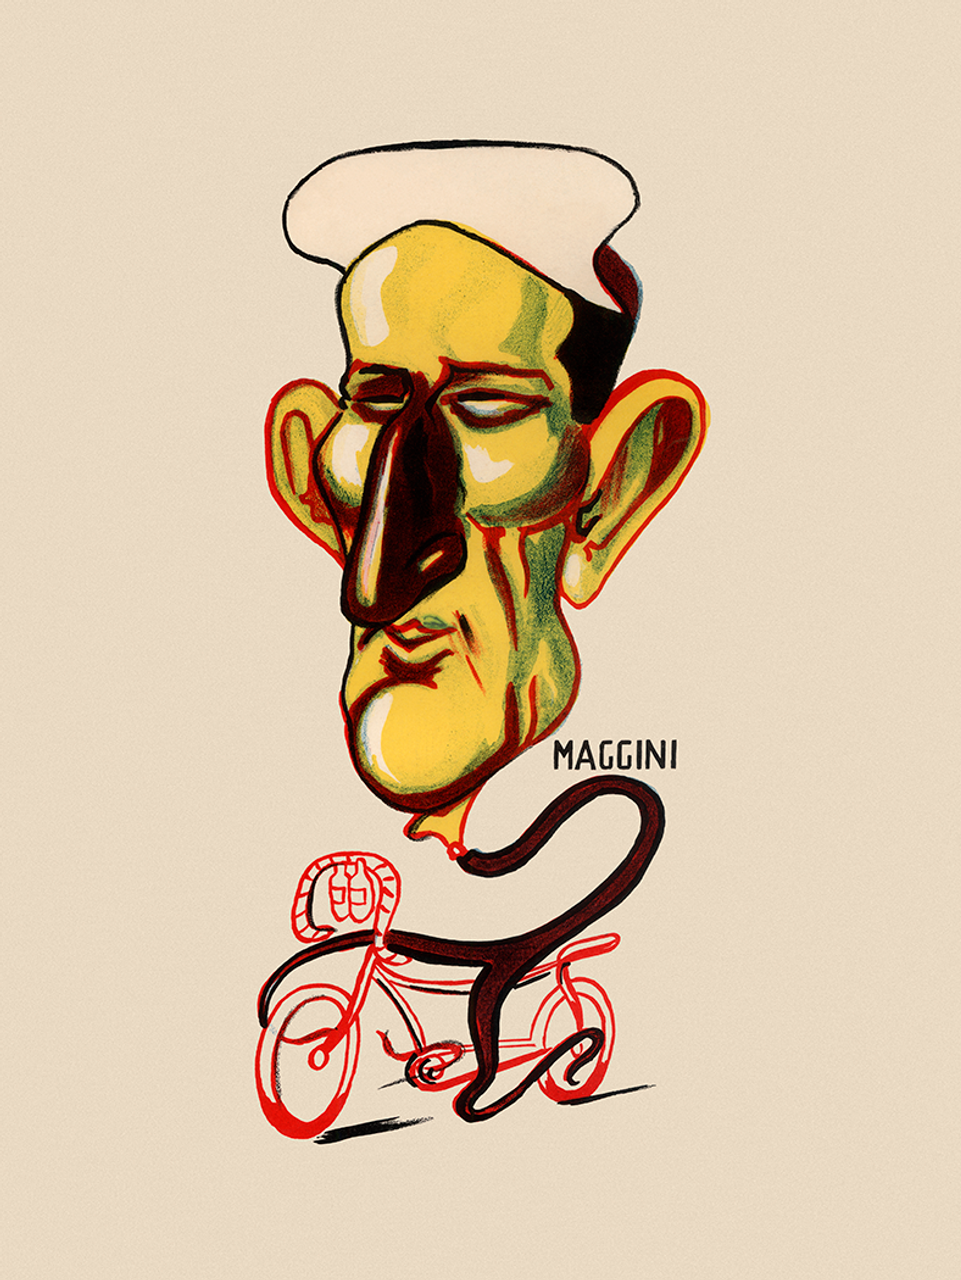 Luciano Maggini Italian Professional Cyclist Bicycle Poster